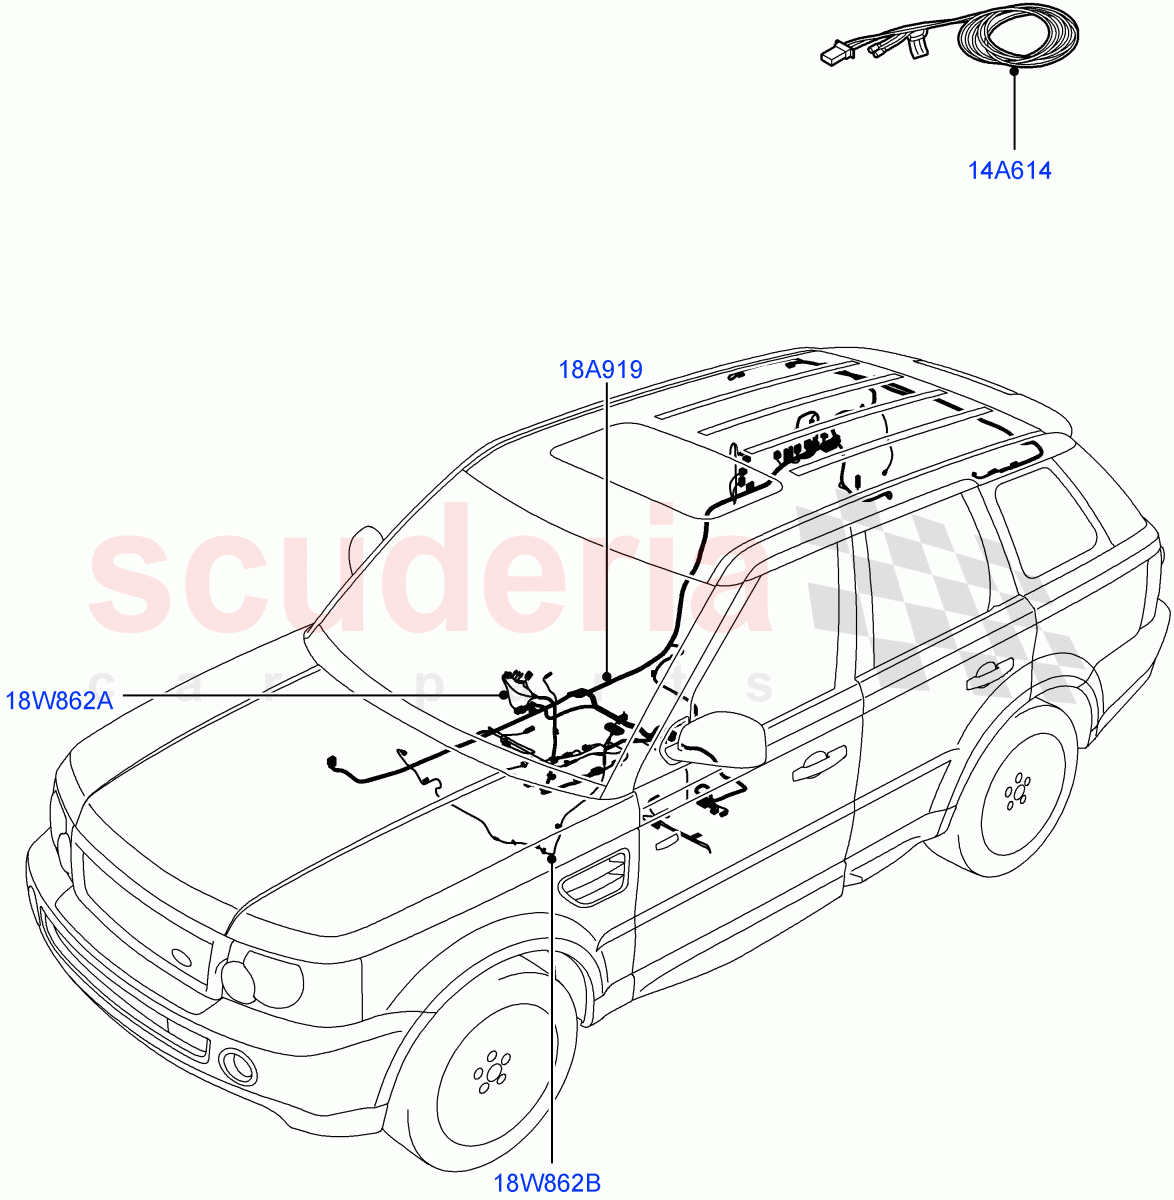 Electrical Wiring - Body And Rear(Audio/Navigation/Entertainment)((V)TO8A999999) of Land Rover Land Rover Range Rover Sport (2005-2009) [3.6 V8 32V DOHC EFI Diesel]